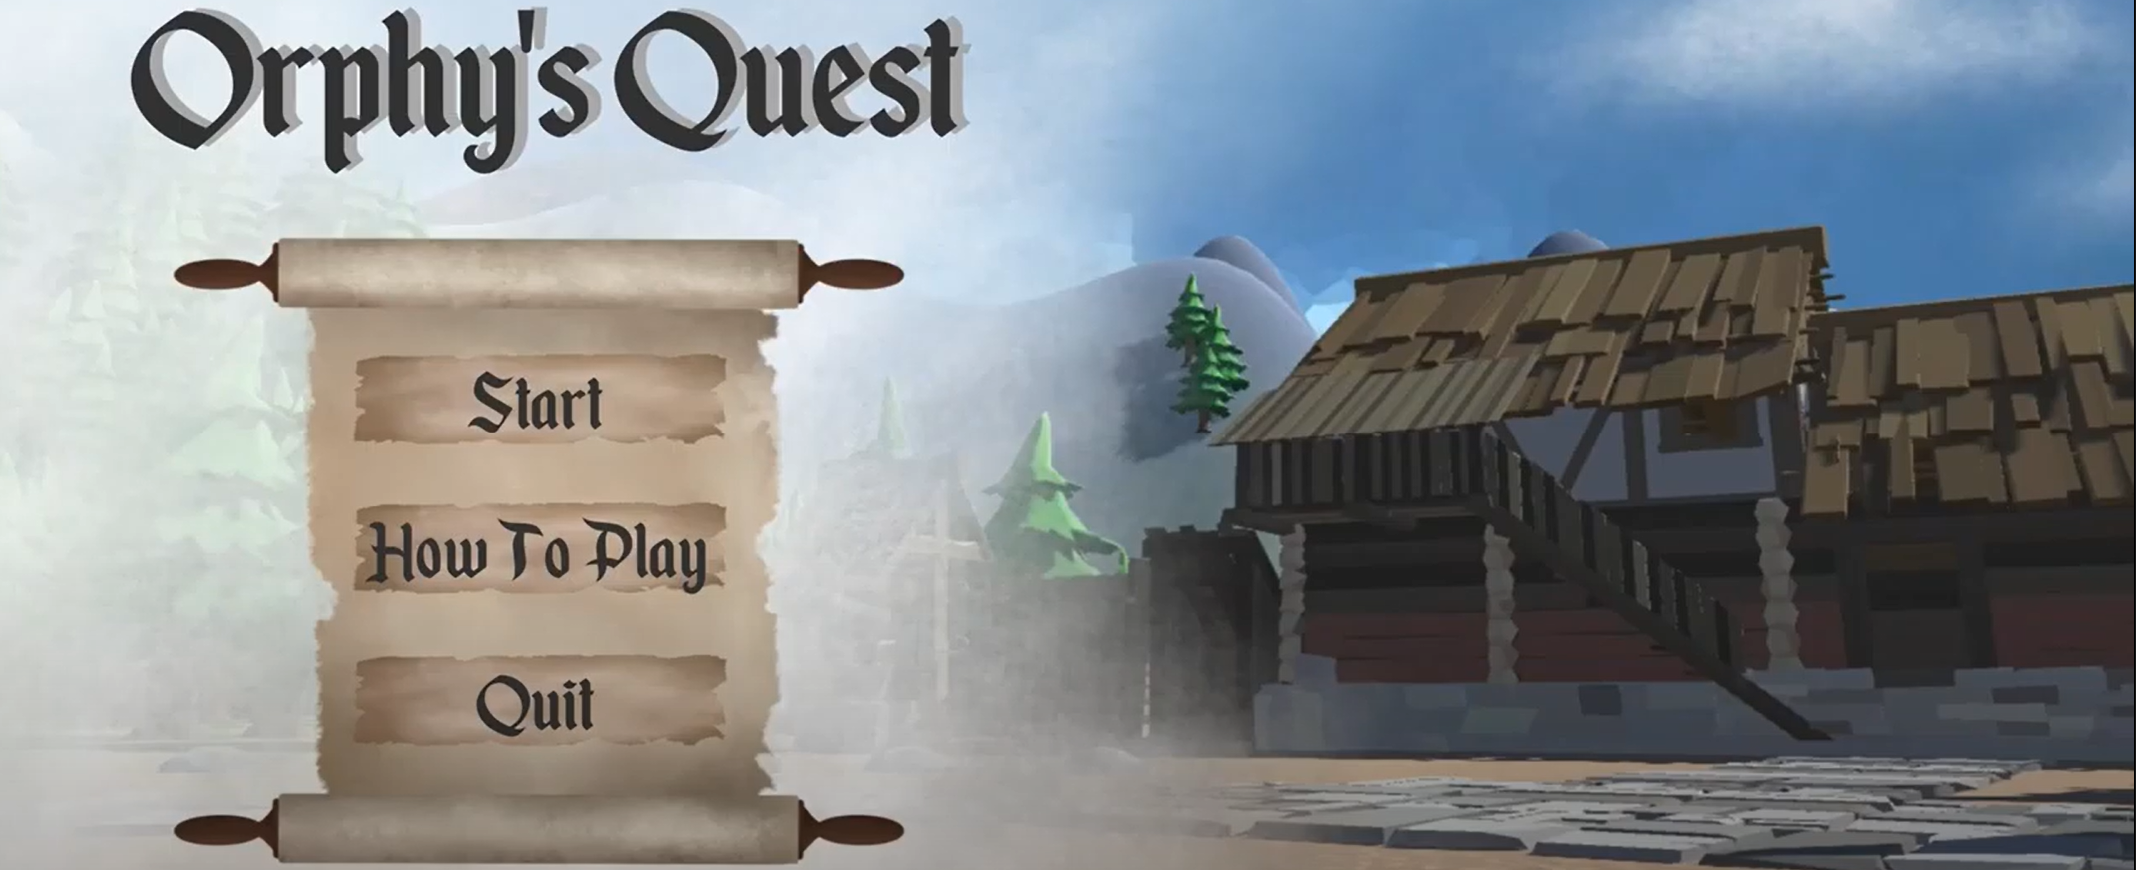 Orphy's Quest